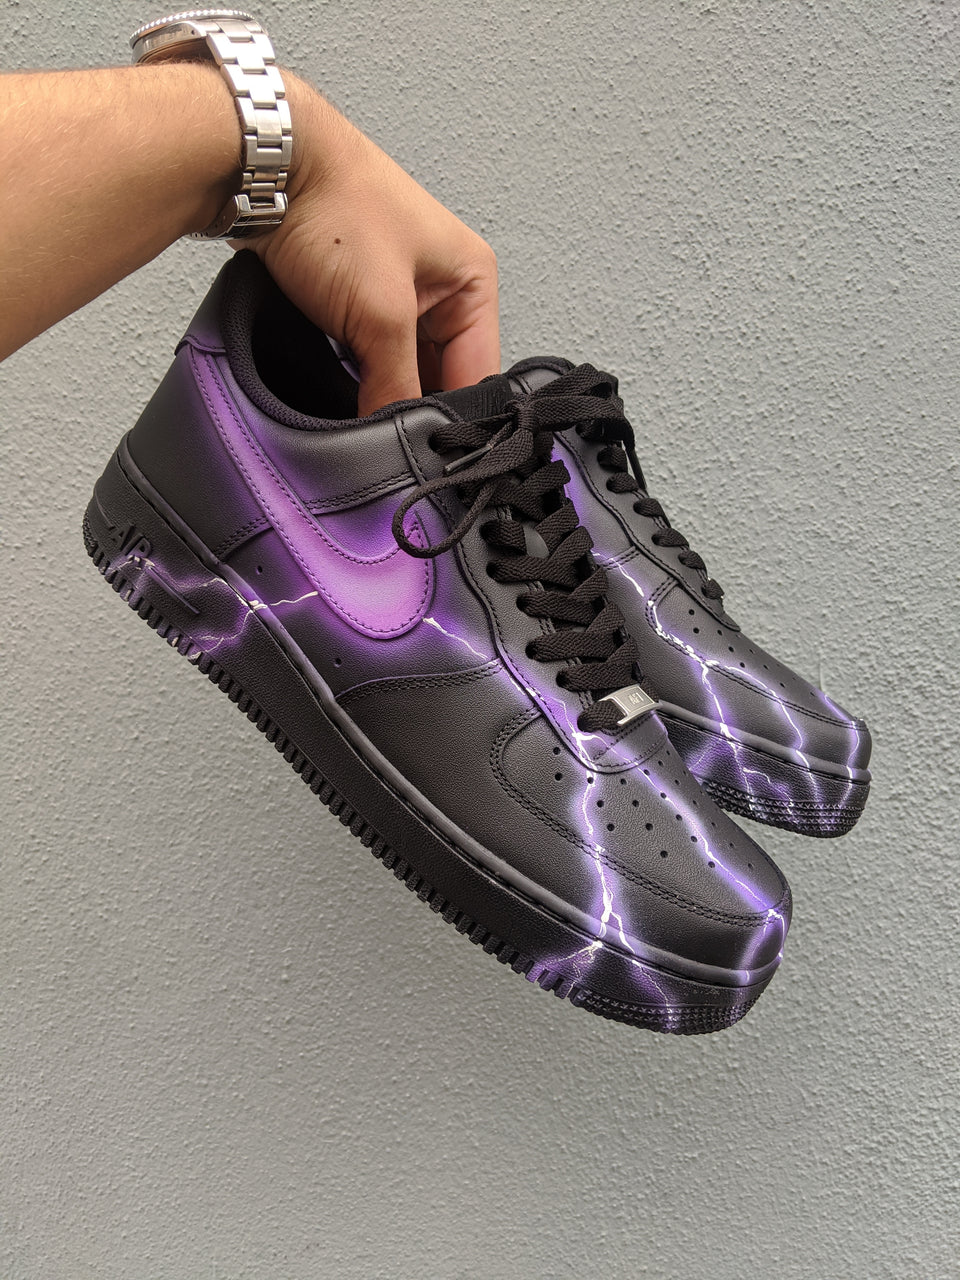 all purple air force 1